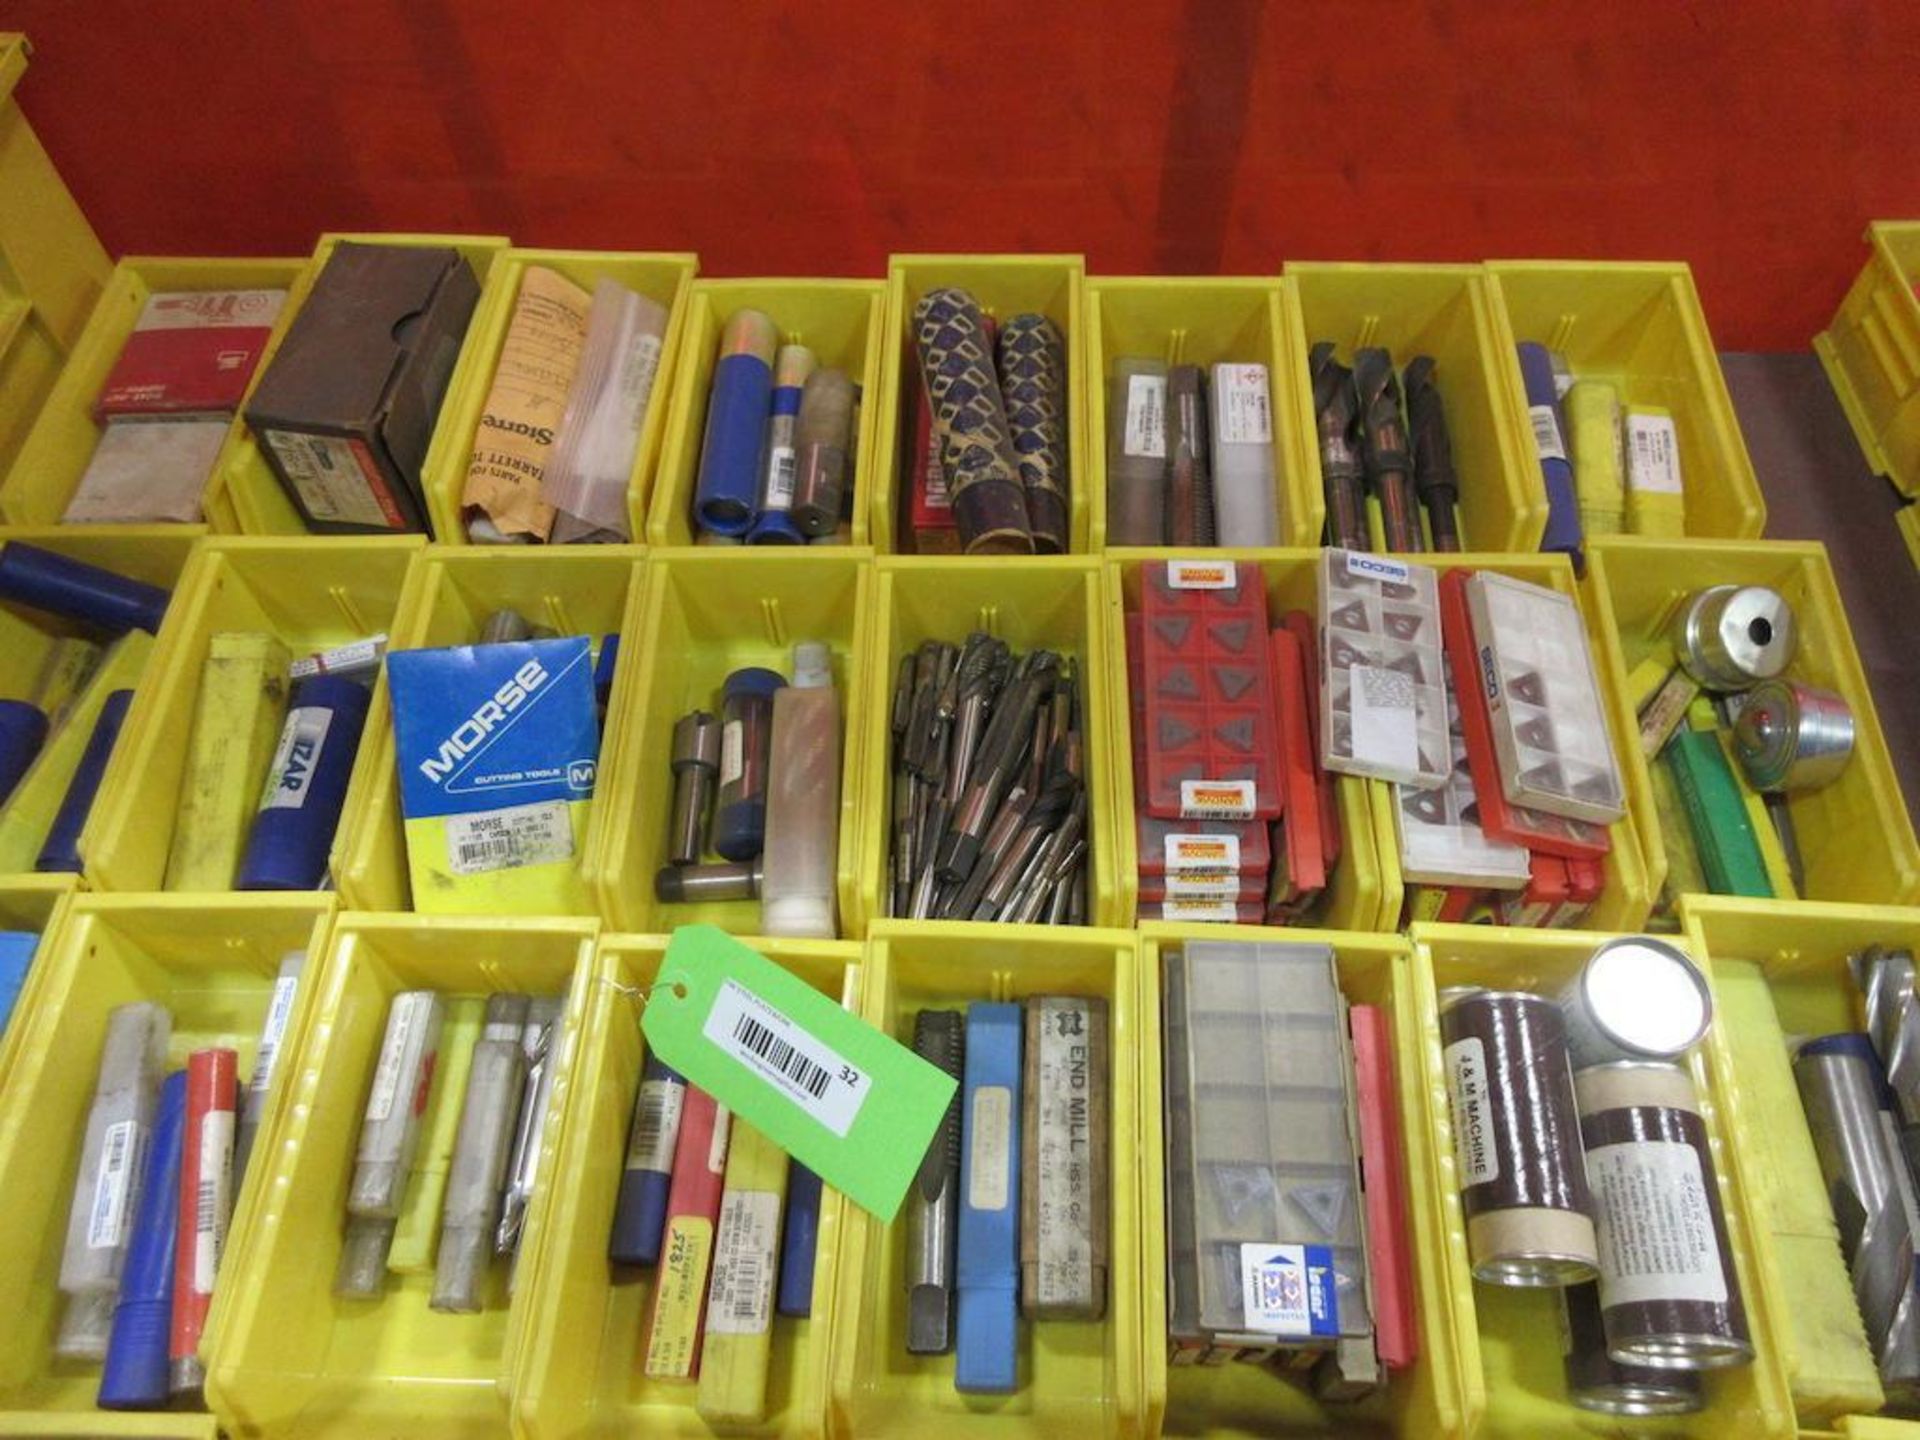 (32) BINS ASSORTED CUTTING TOOLS, ISCAR, SANDVIK, SECO, MORSE, REAMERS, CUTTERS ETC. - Image 2 of 3